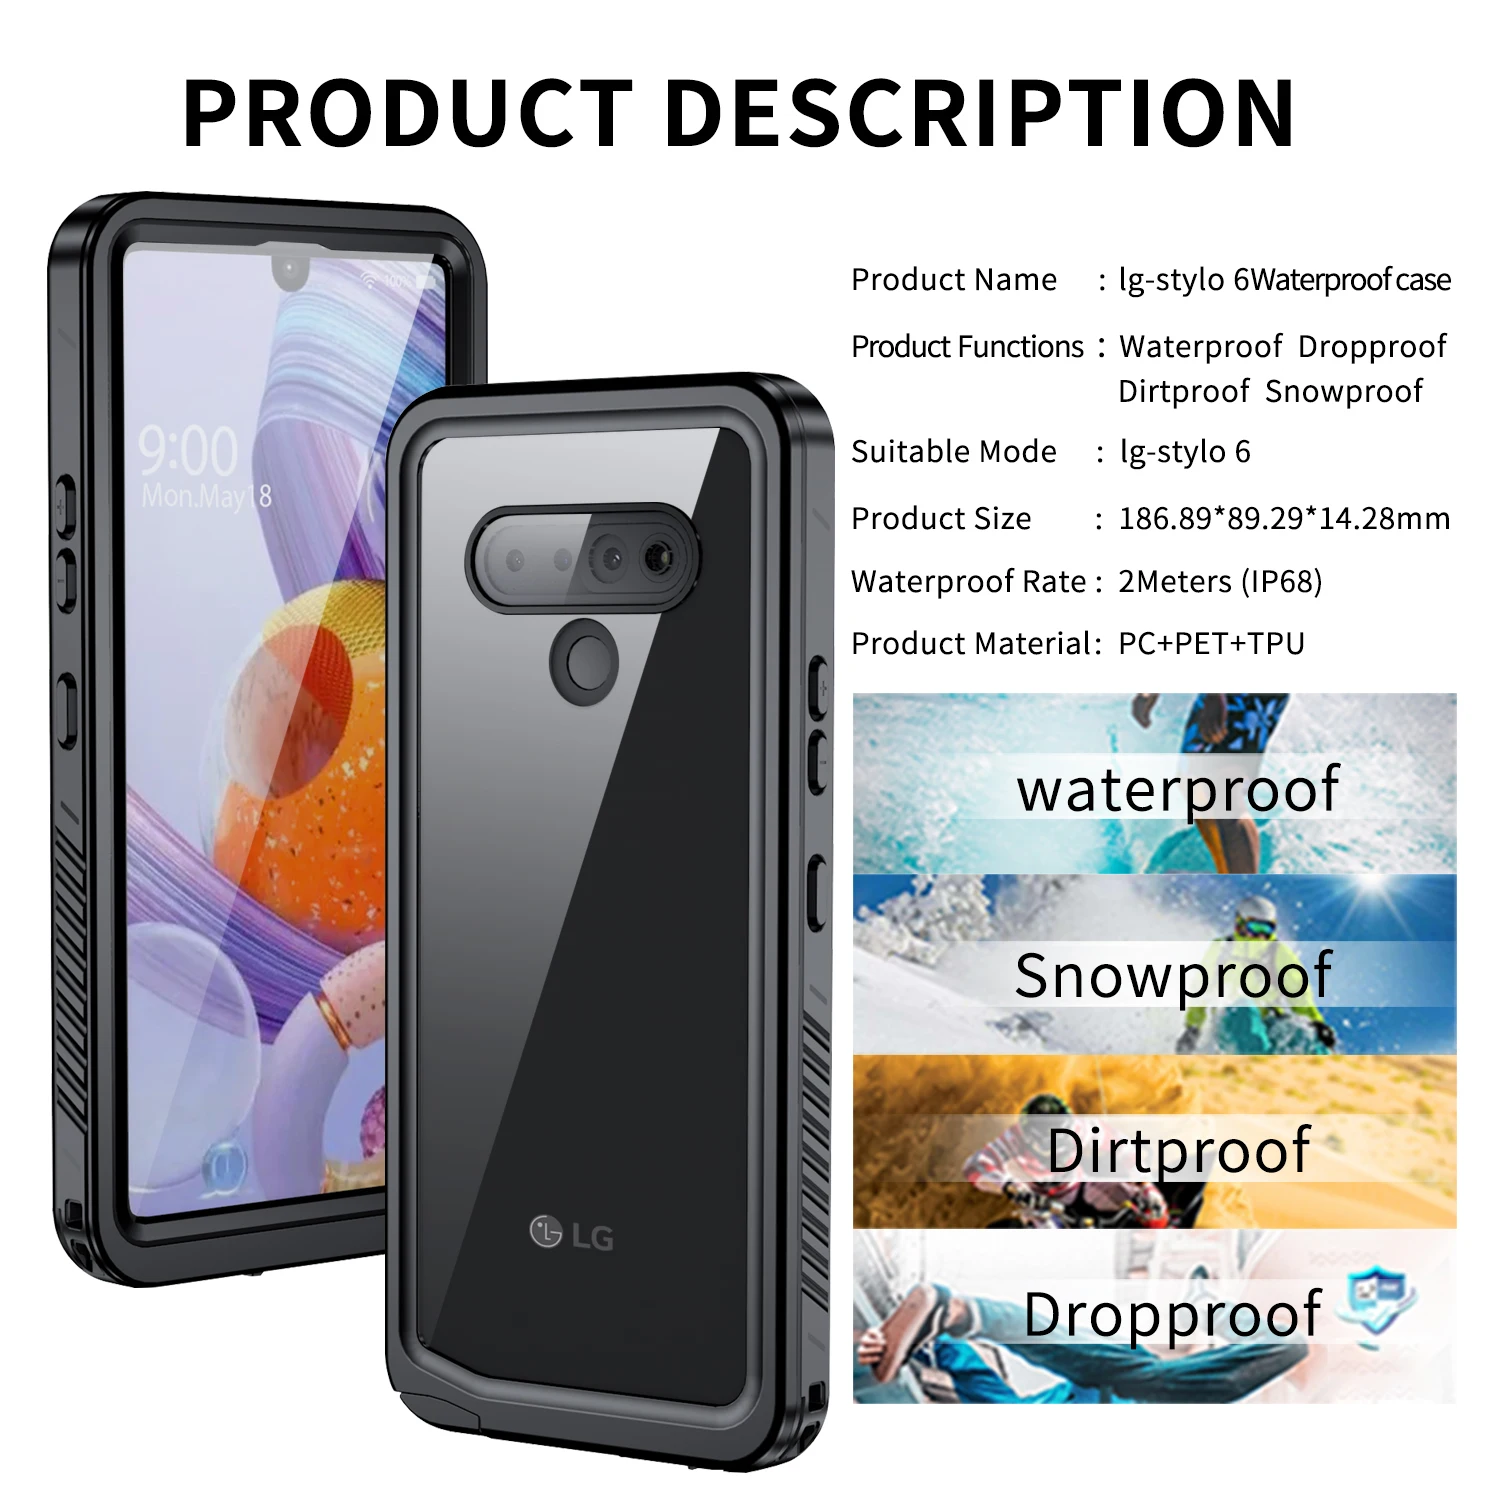 IP68 Waterproof Phone Case for LG Stylo 6 Coque Heavy Duty Full Protection  Shockproof Case for LG Stylo6 Waterproof Cover - AliExpress